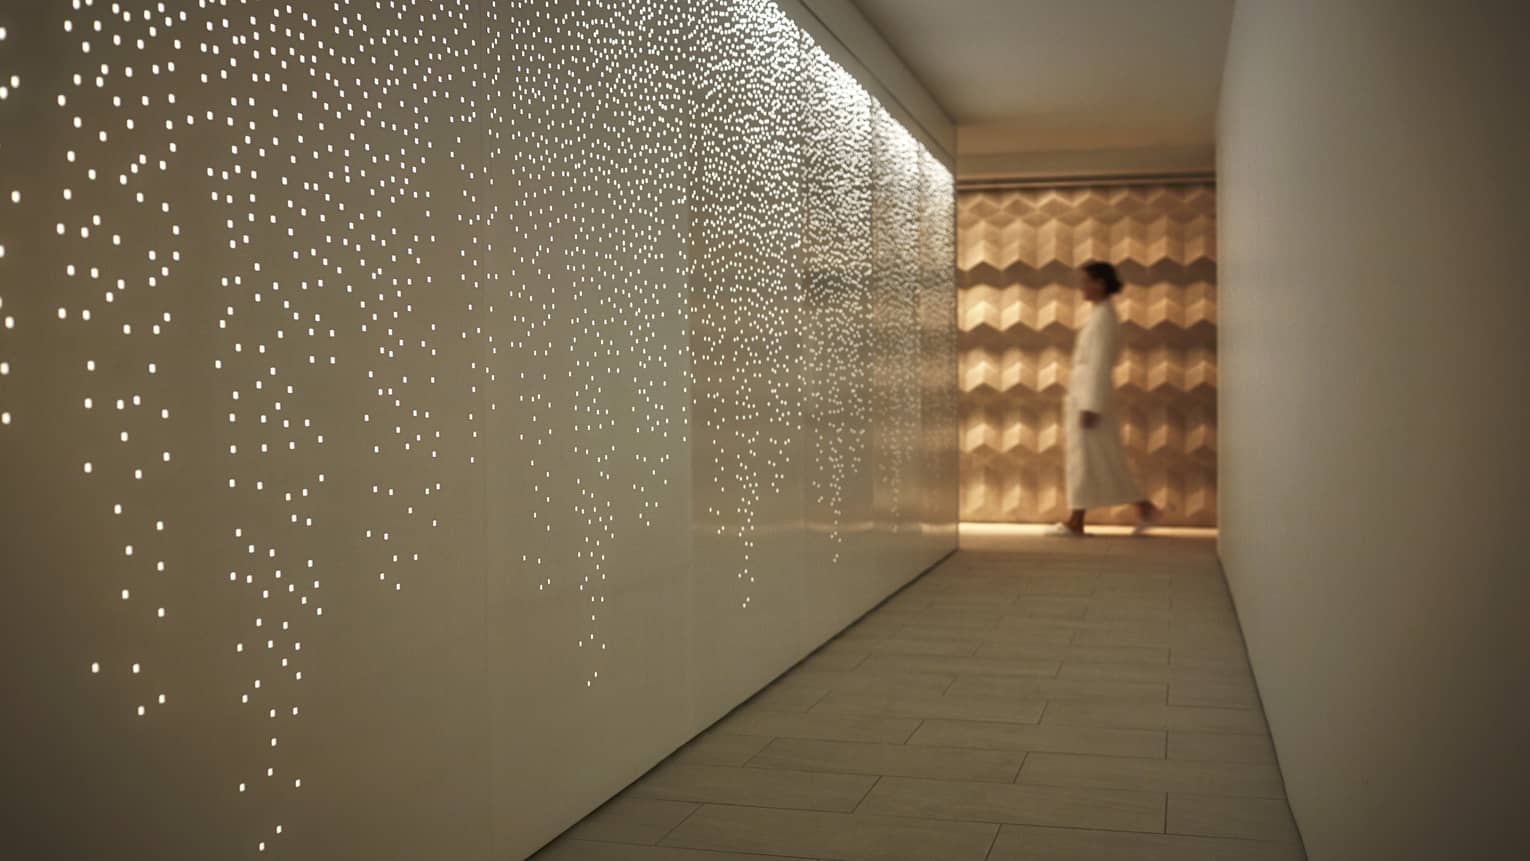 Dimly-lit spa hallways with star-speckled walls, woman in white robe walking